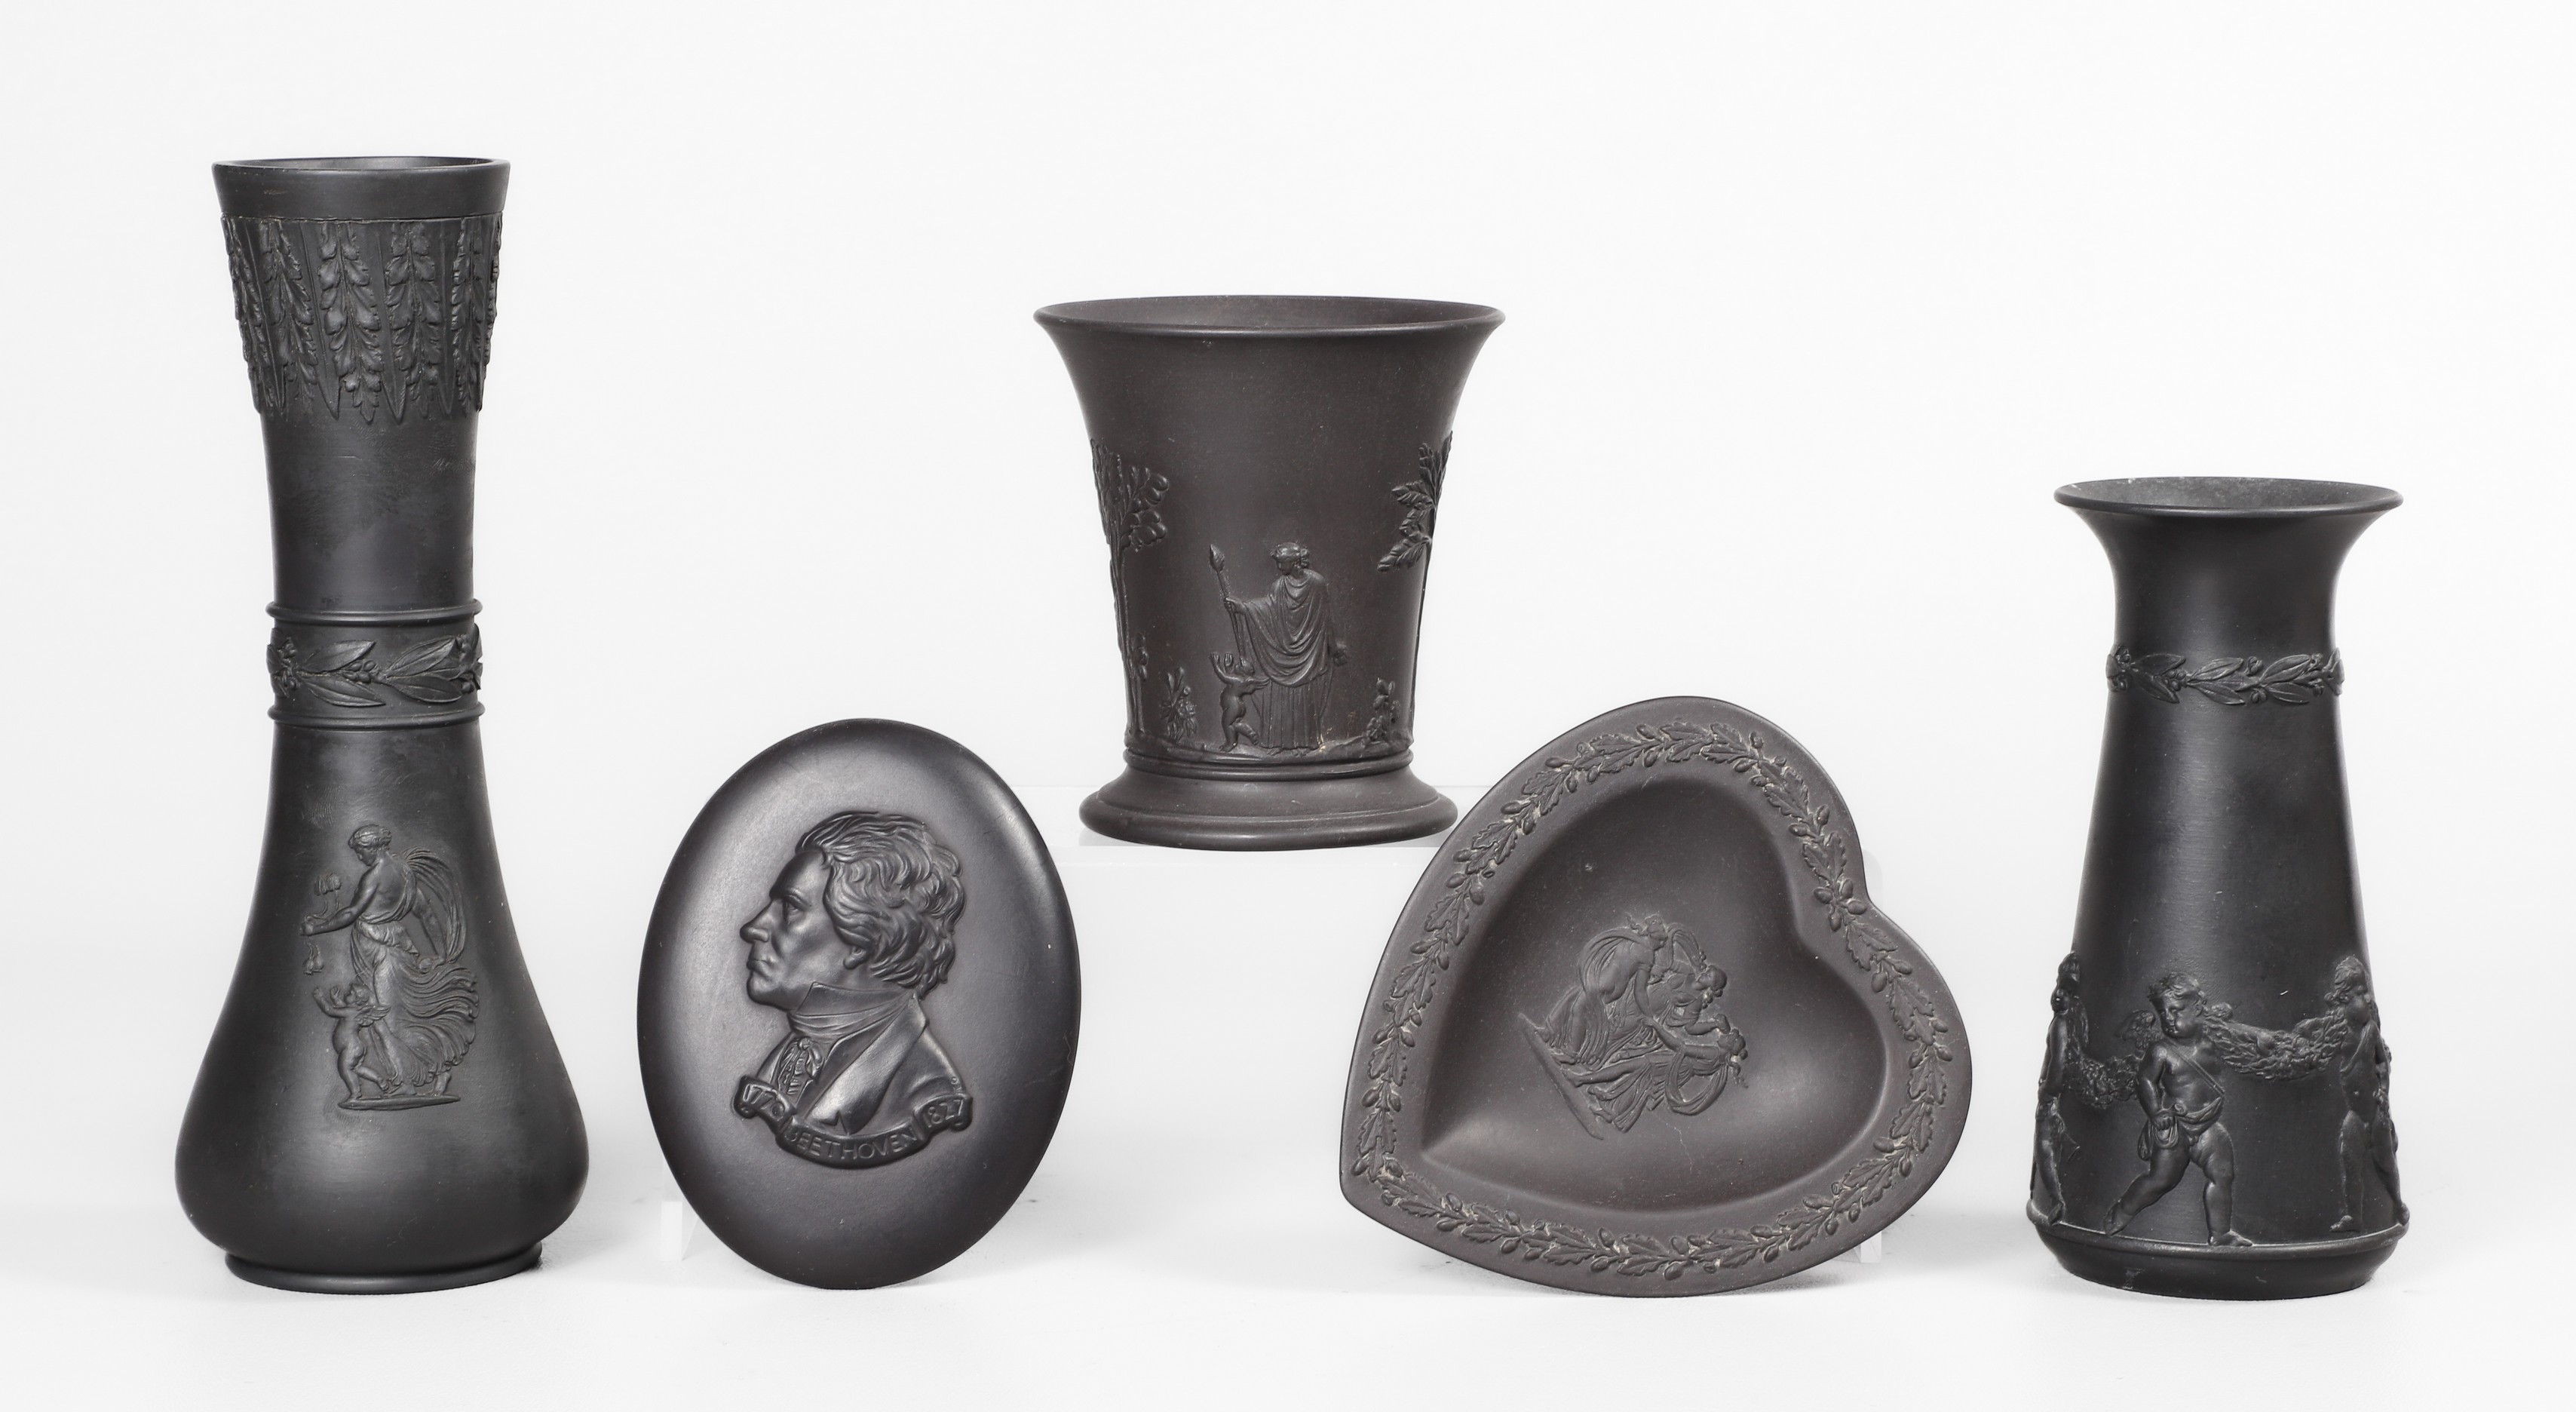  5 Wedgwood articles to include 2e07d0